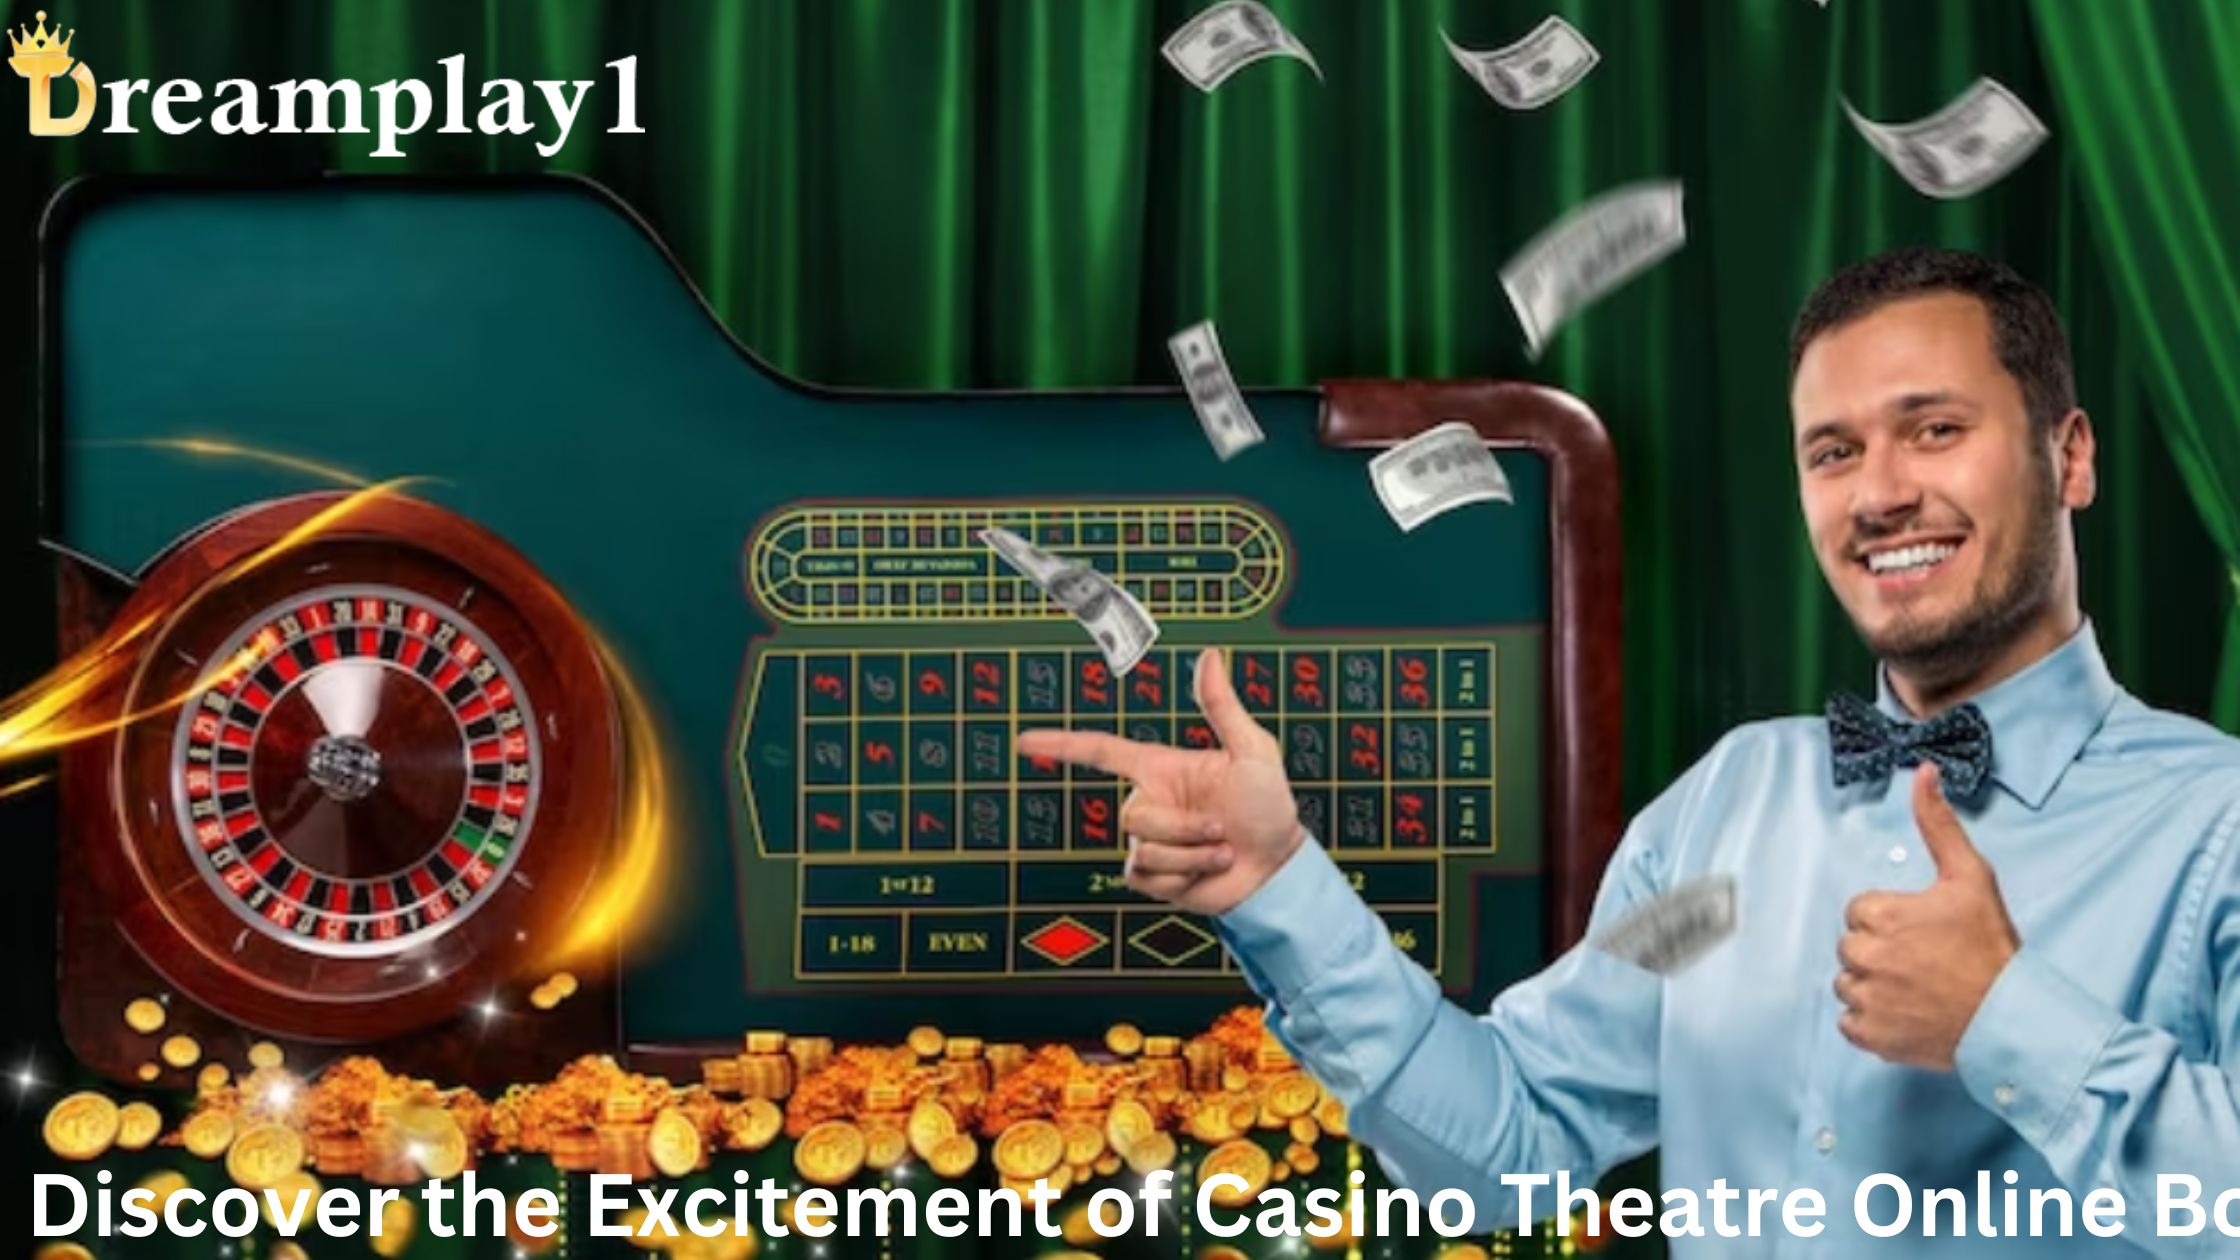 Discover the Excitement of Casino Theatre Online Booking